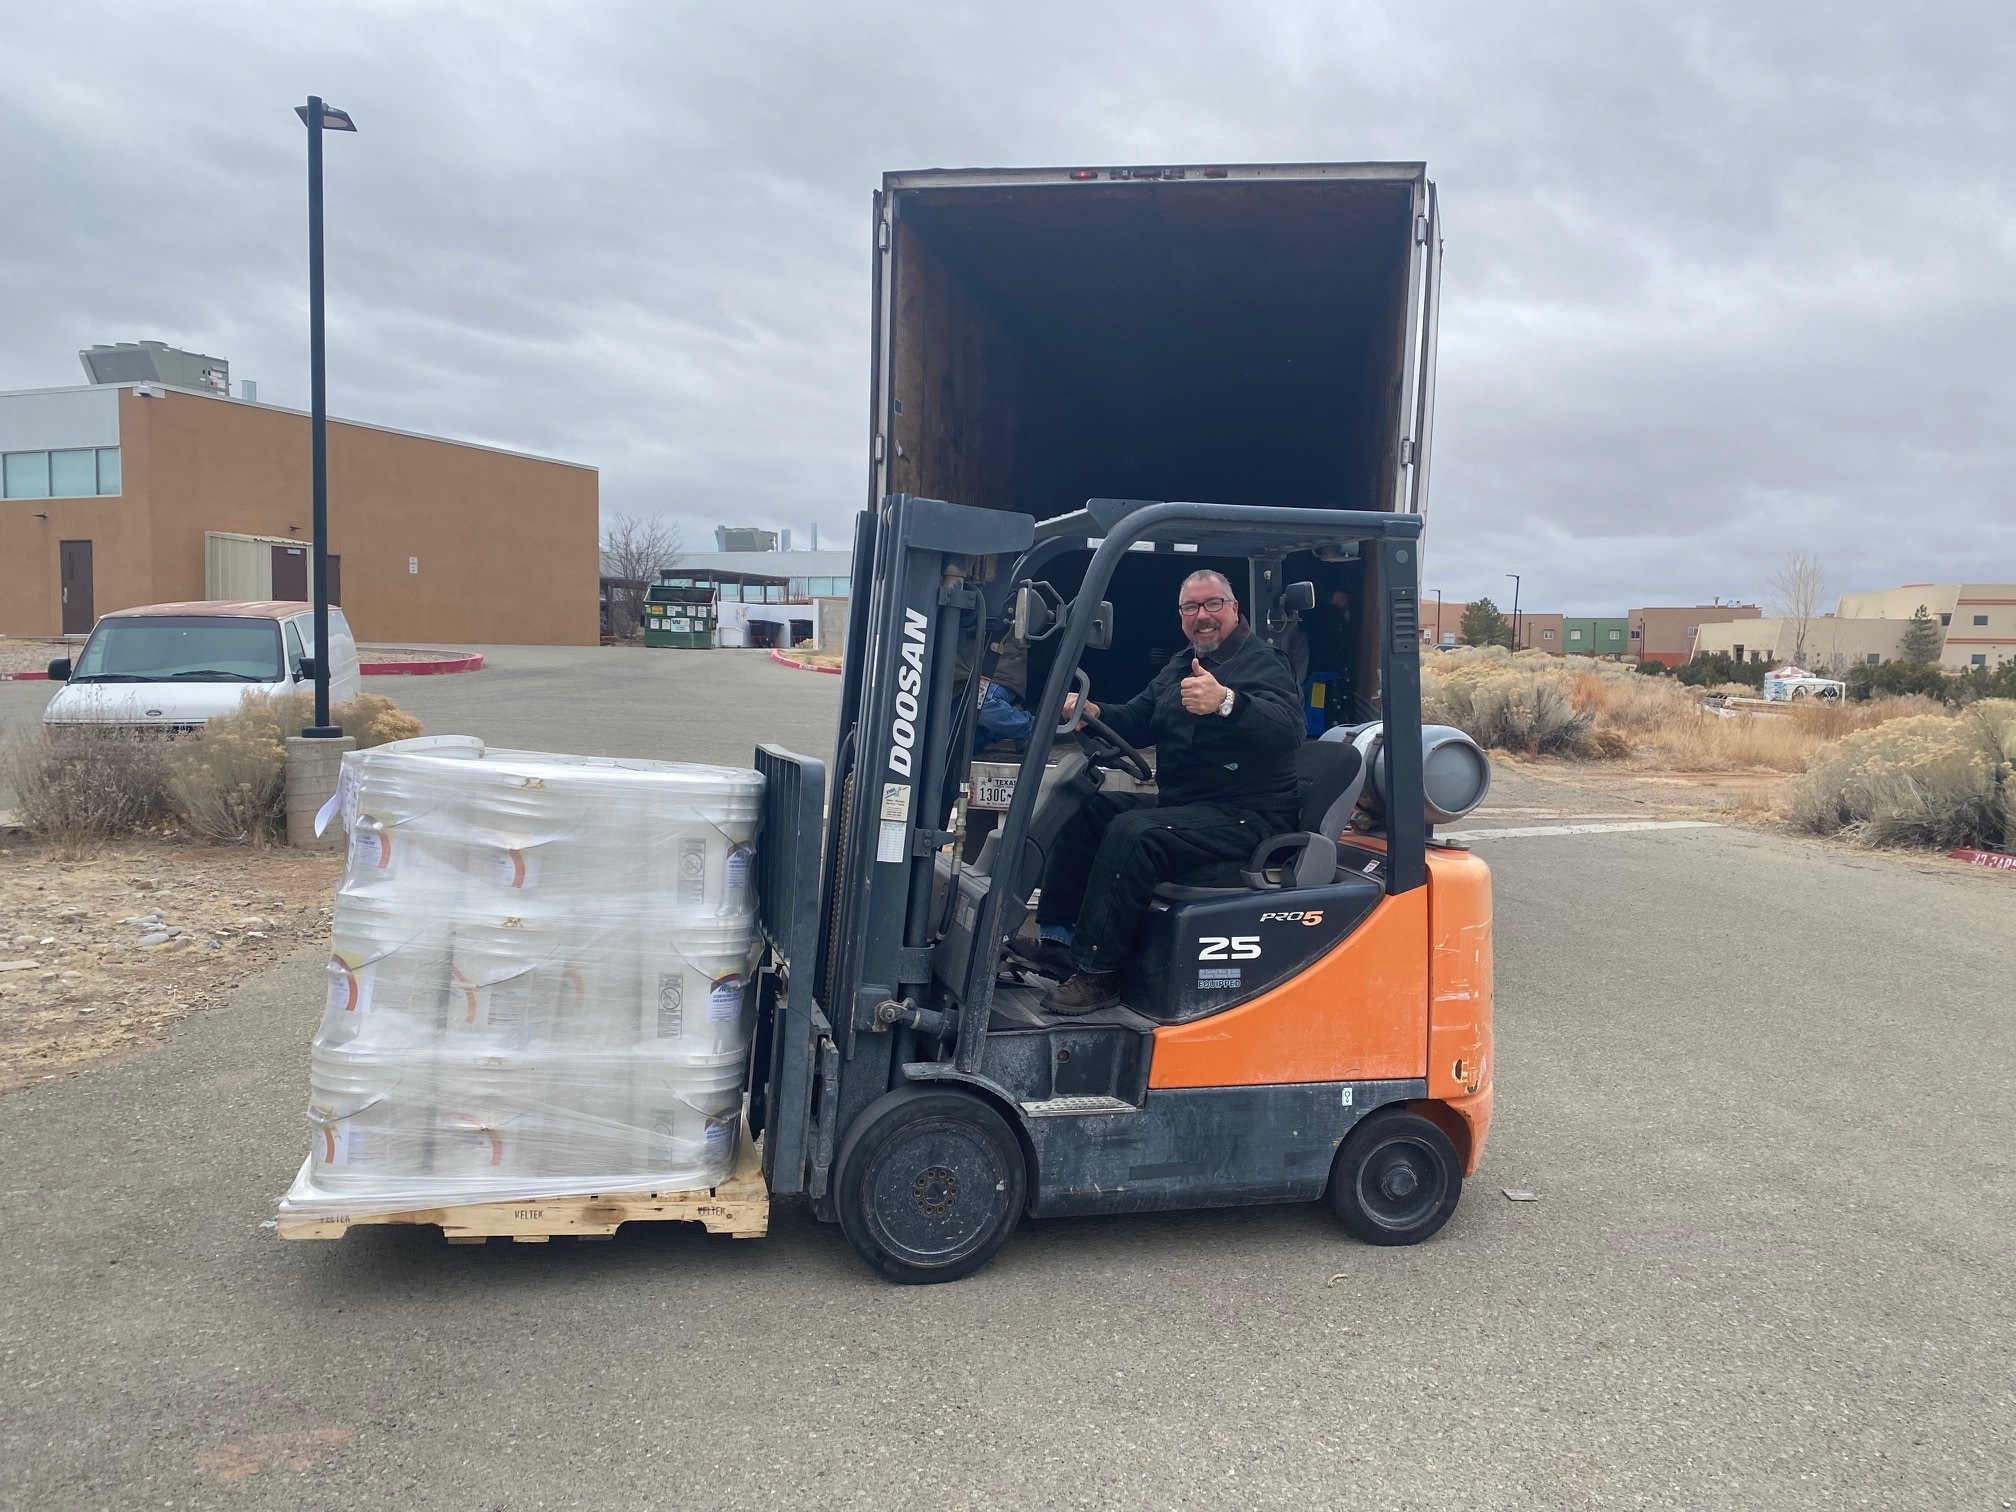 Peter Romero, Director of Facilities and Security at the Institute of American Indian Arts in Santa Fe, New Mexico, readies the college’s newly delivered supply.
 
